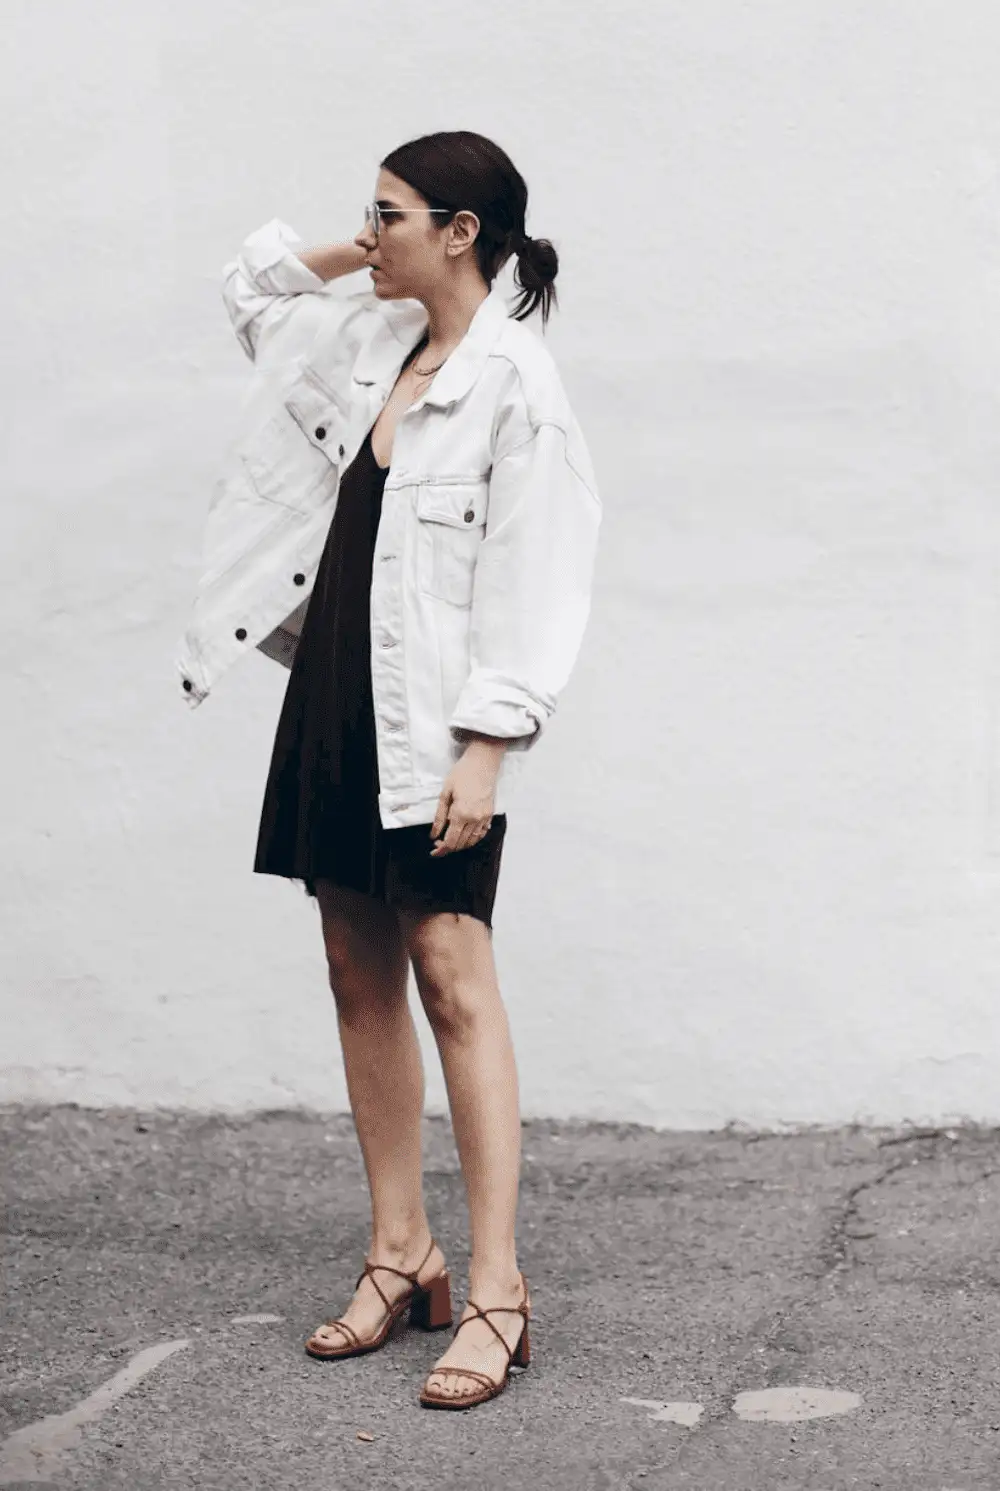 Jean Jacket With Black Dress: Know How To Rock It Right Way